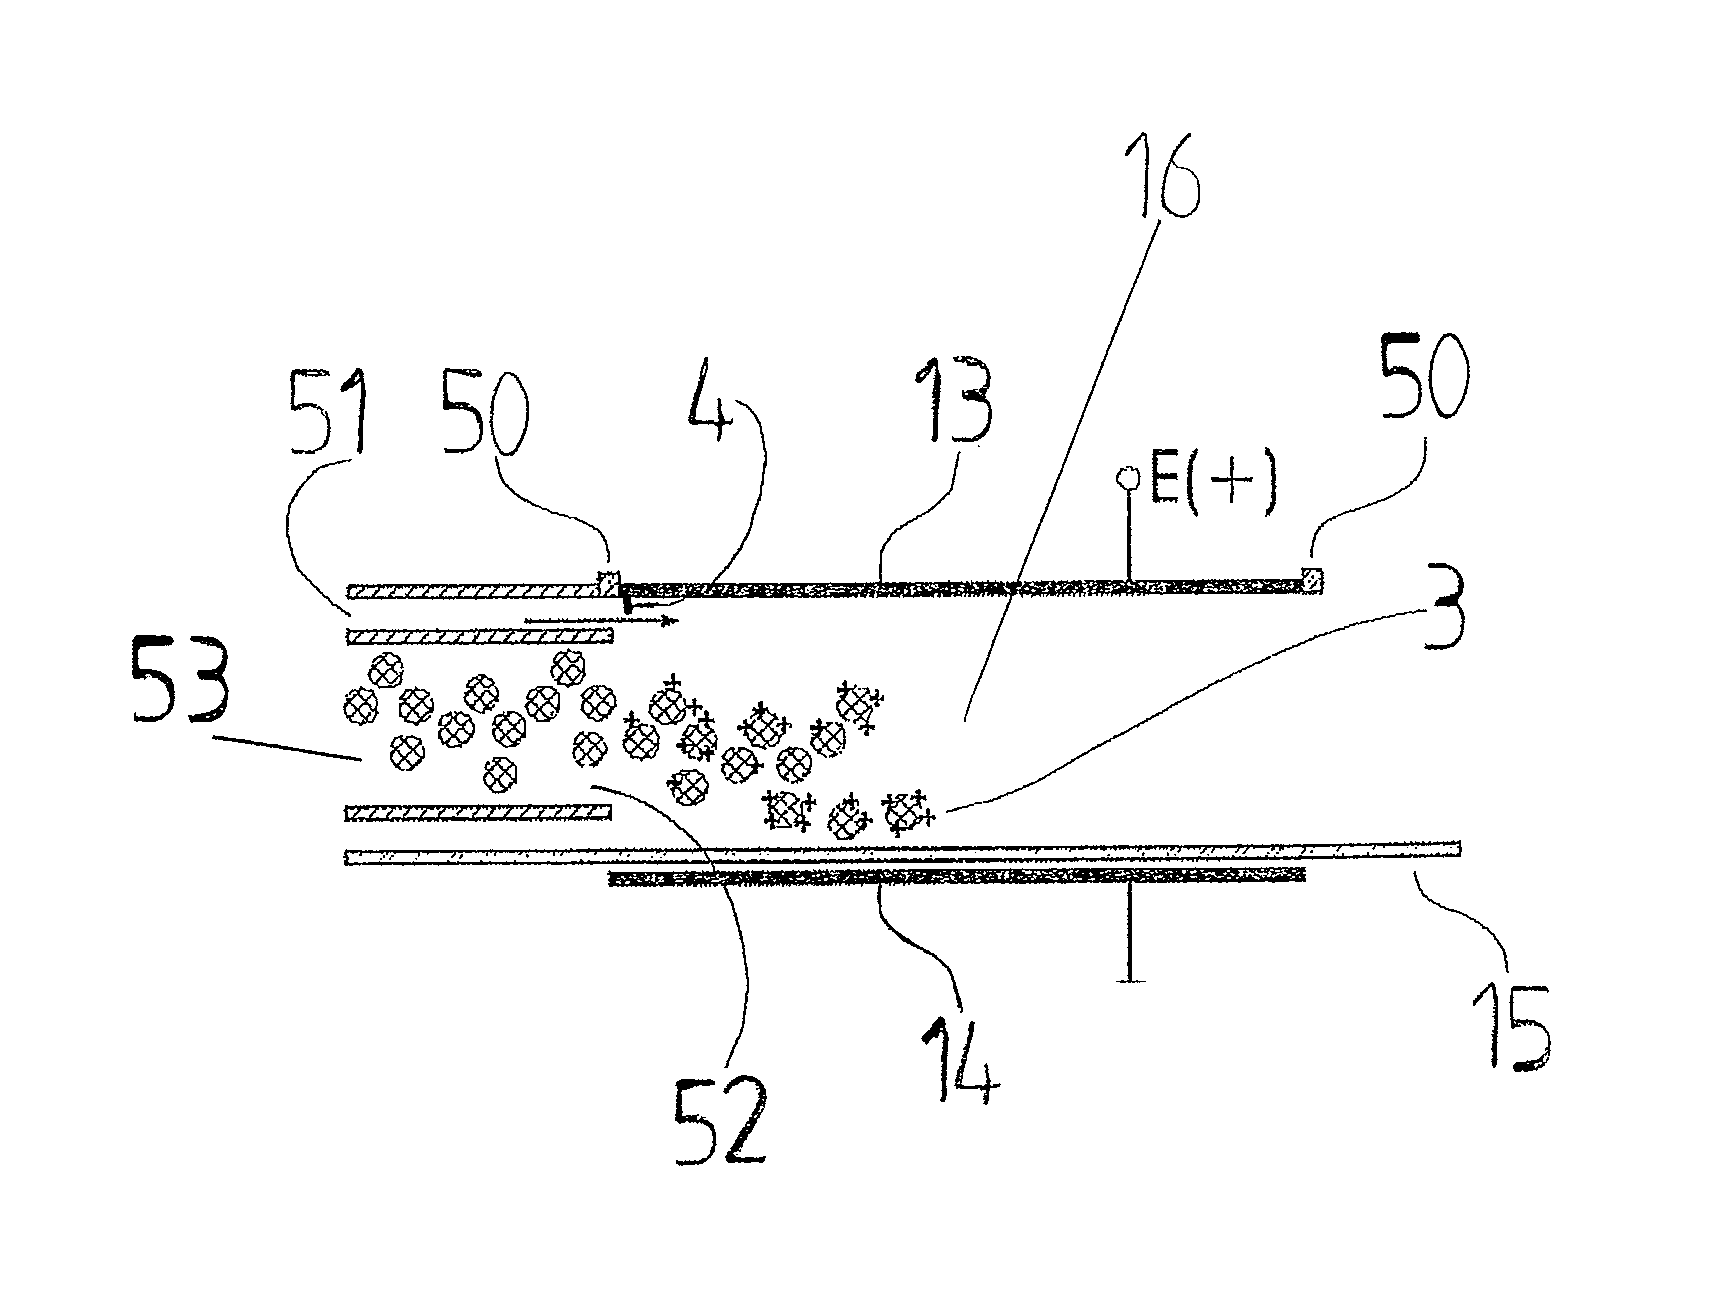 Apparatus and method for coating glass substrate